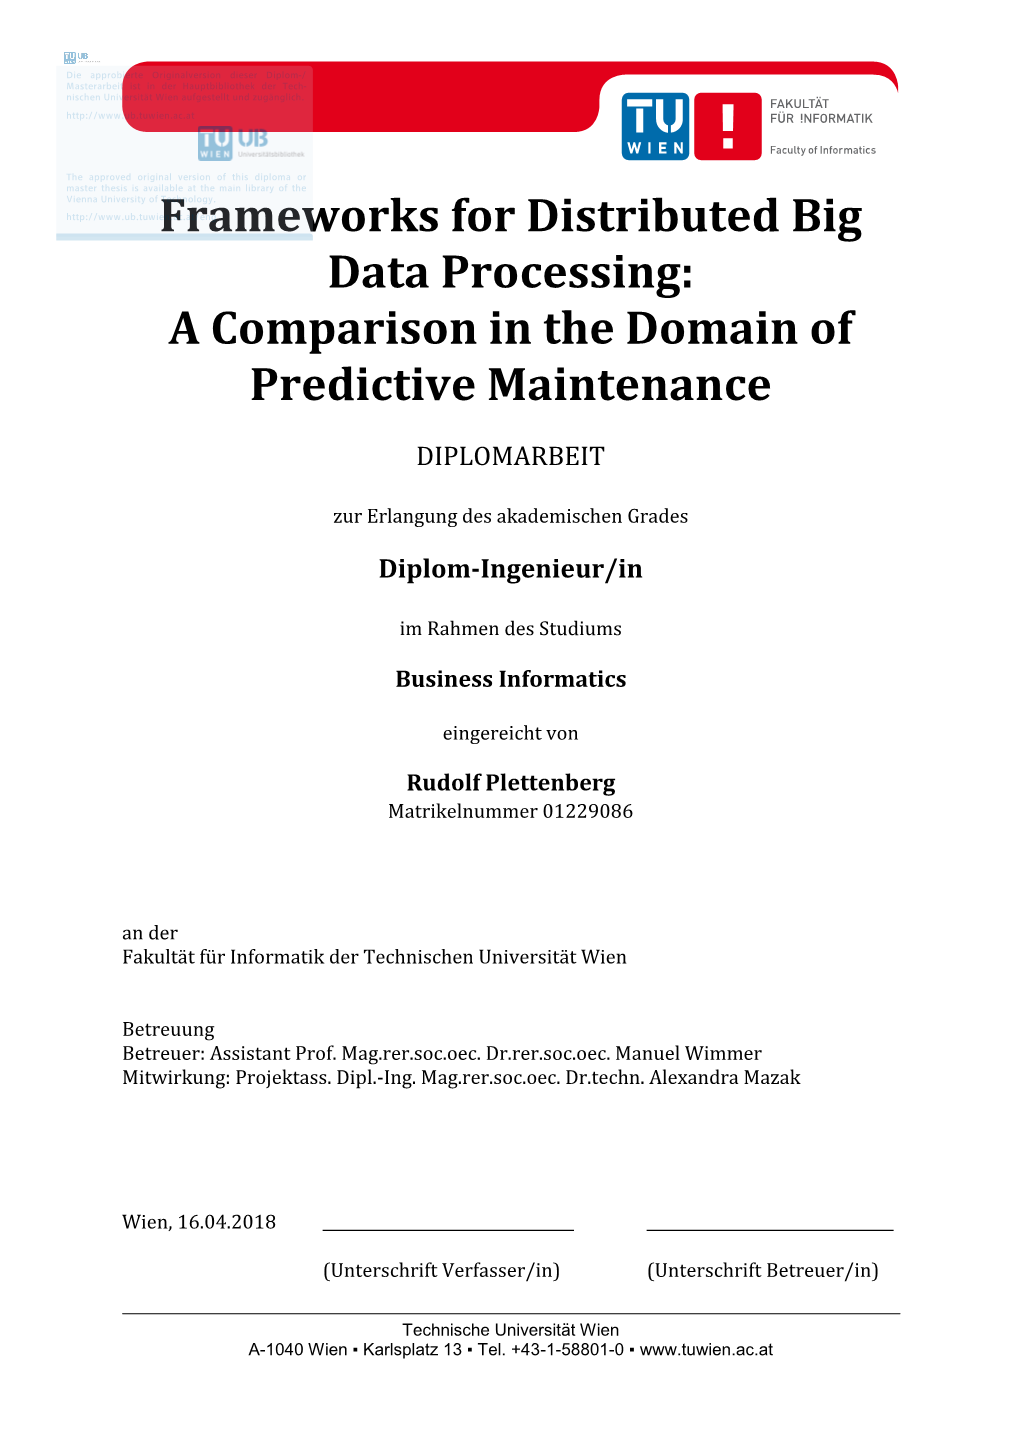 Frameworks for Distributed Big Data Processing: a Comparison in the Domain of Predictive Maintenance